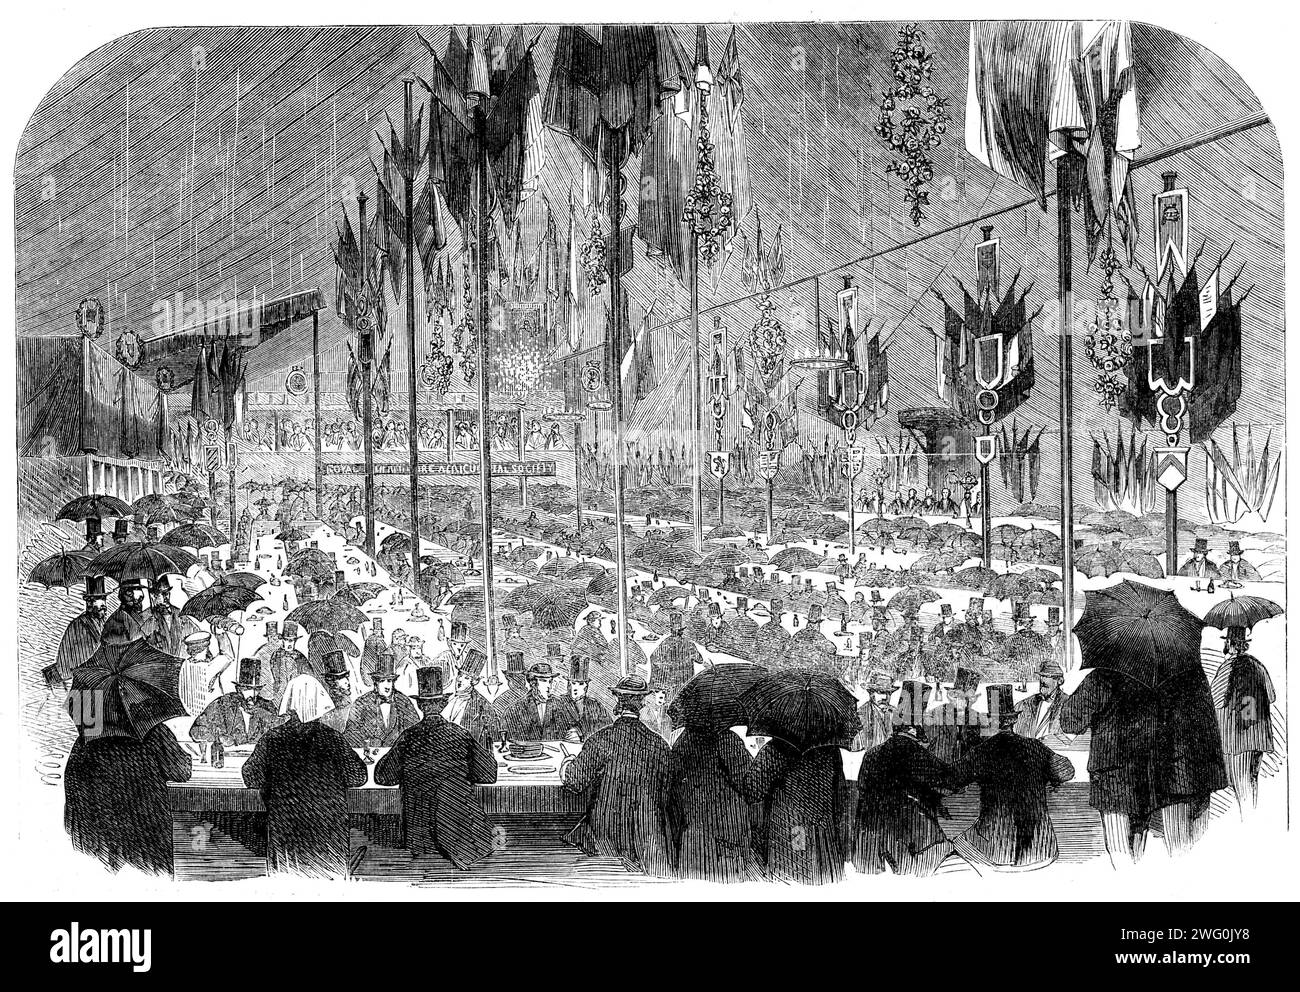 The Preston Guild Festival: the Royal North Lancashire Agricultural Society's dinner, 1862. 'The dinner on Wednesday afternoon was a grand success, so far as attendance was concerned. The congregation of 1700 people to satisfy the pangs of hunger presents an impressive scene, but when this force is seen to bivouac under umbrellas it becomes highly amusing. There is something unique in the sight of men thus sheltered performing gastronomic duets. What the rain could make uneatable was rendered so; but, as soon as the remainder had been discussed, Lord Derby - who had been conveyed from the Mayo Stock Photo